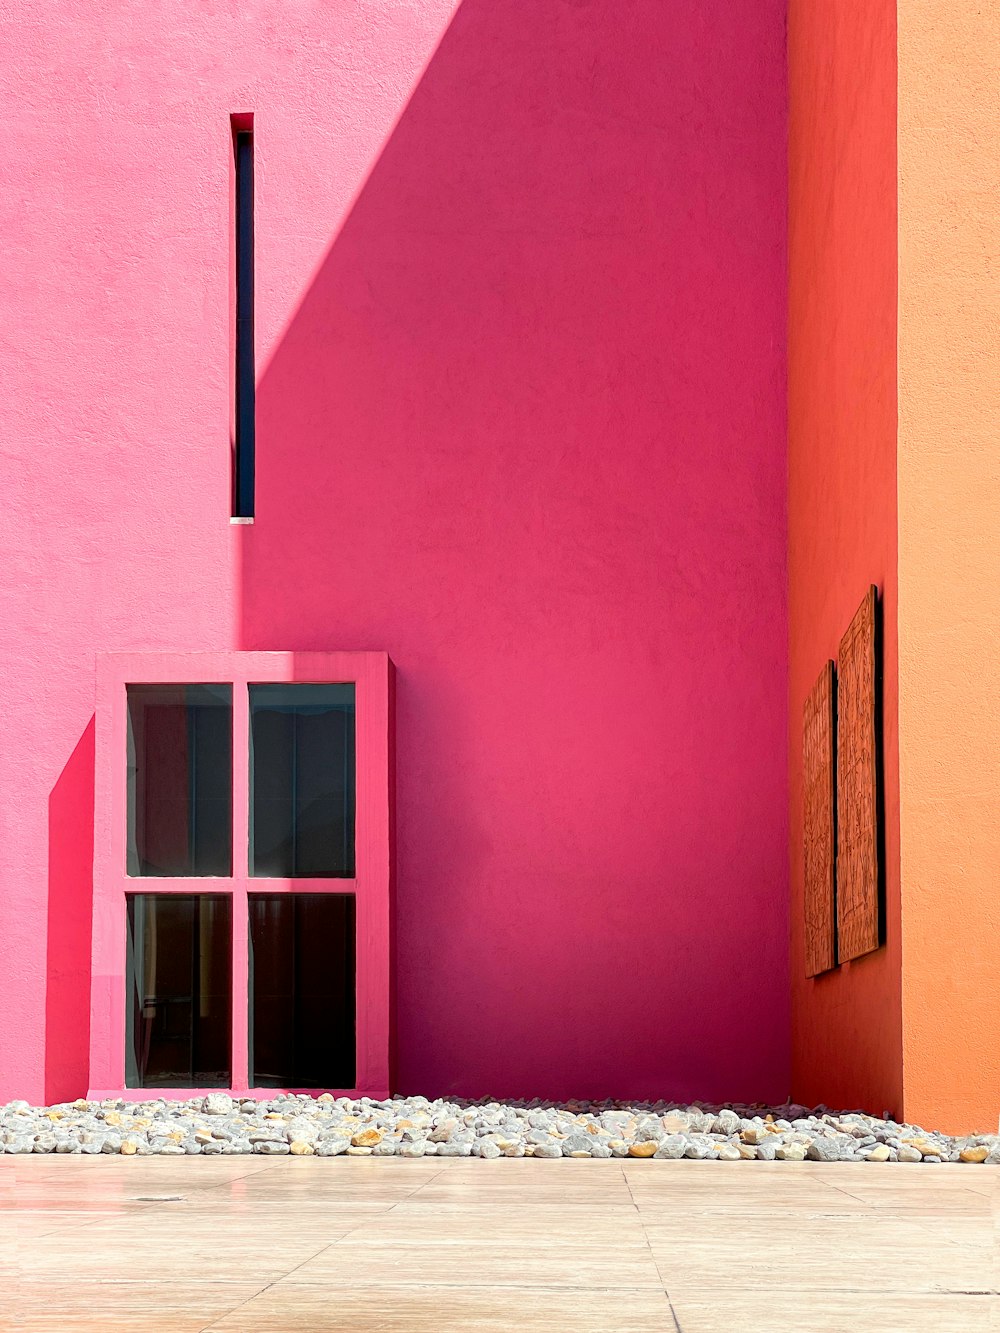 a pink and orange building with a window